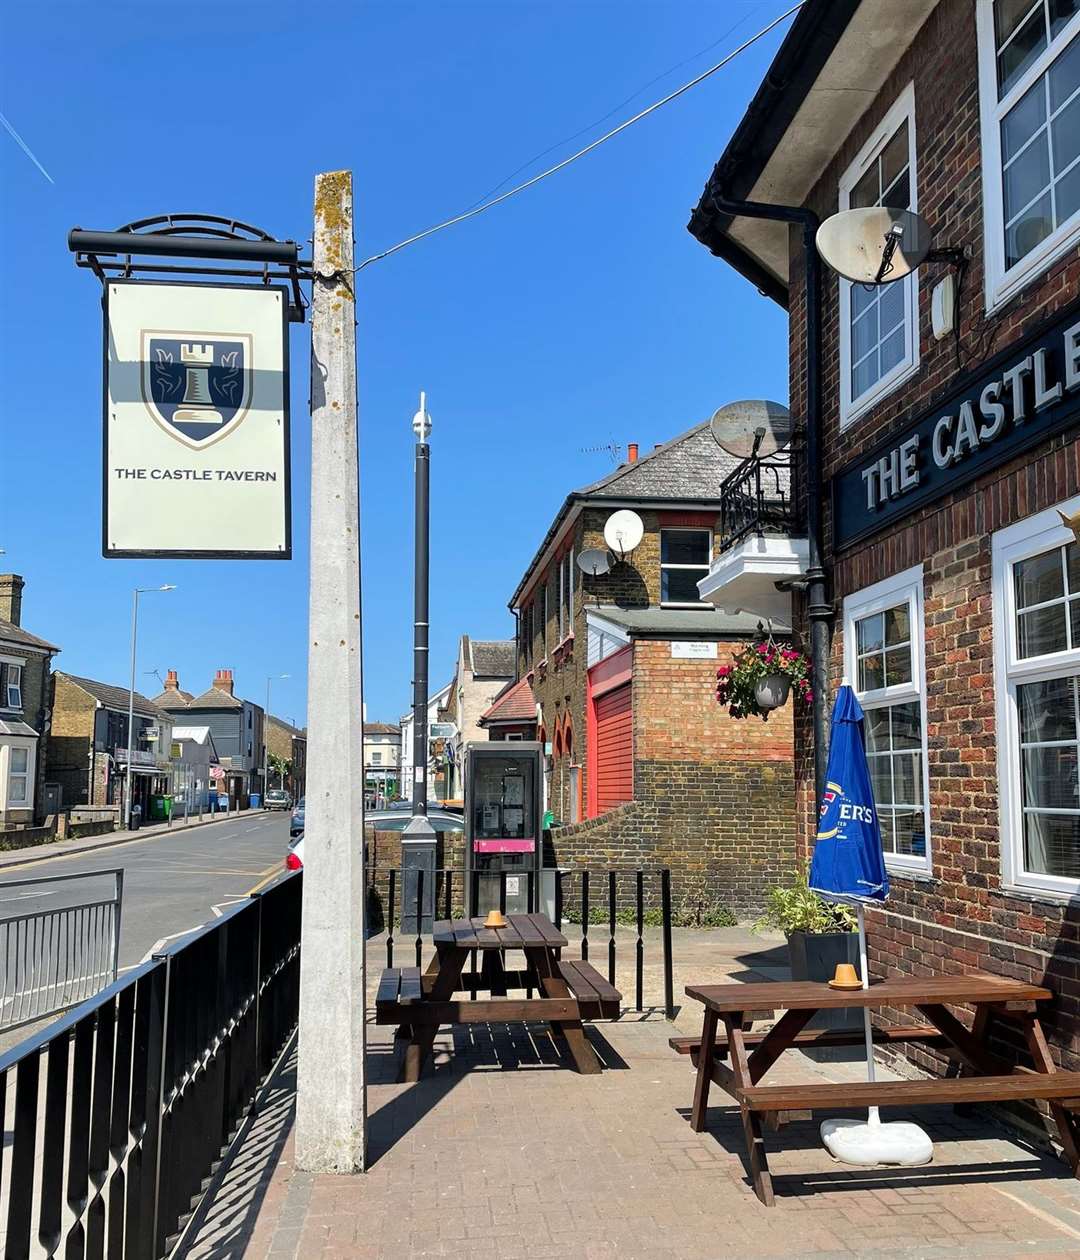 The Castle Tavern in Sheerness last opened back in March 2020